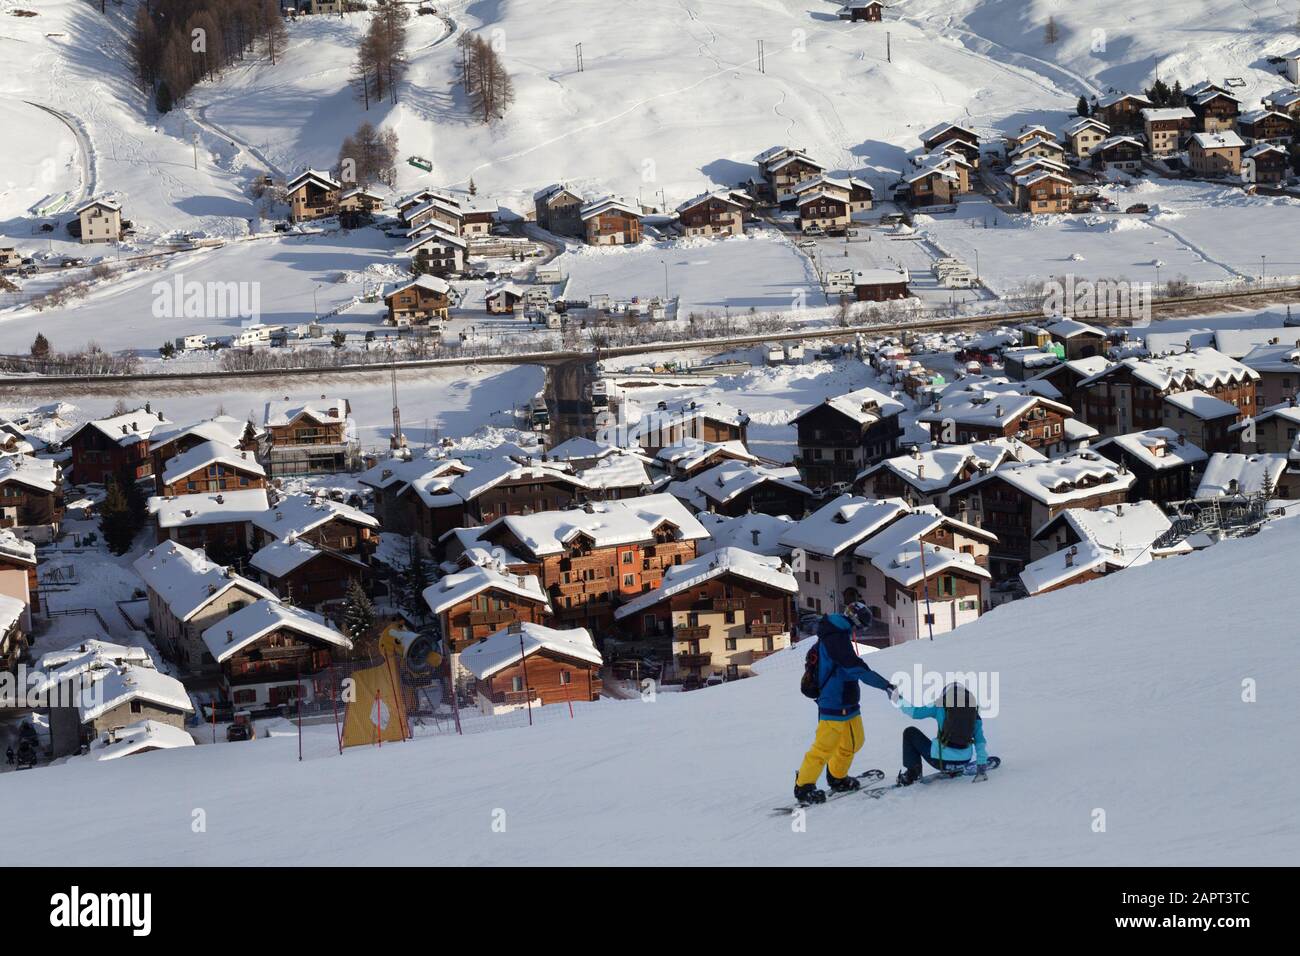 Two snowboarders on snowy ski slope in high winter mountains and sunlit village at background. Evening in Italian Alps. Livigno, region of Lombardy, I Stock Photo